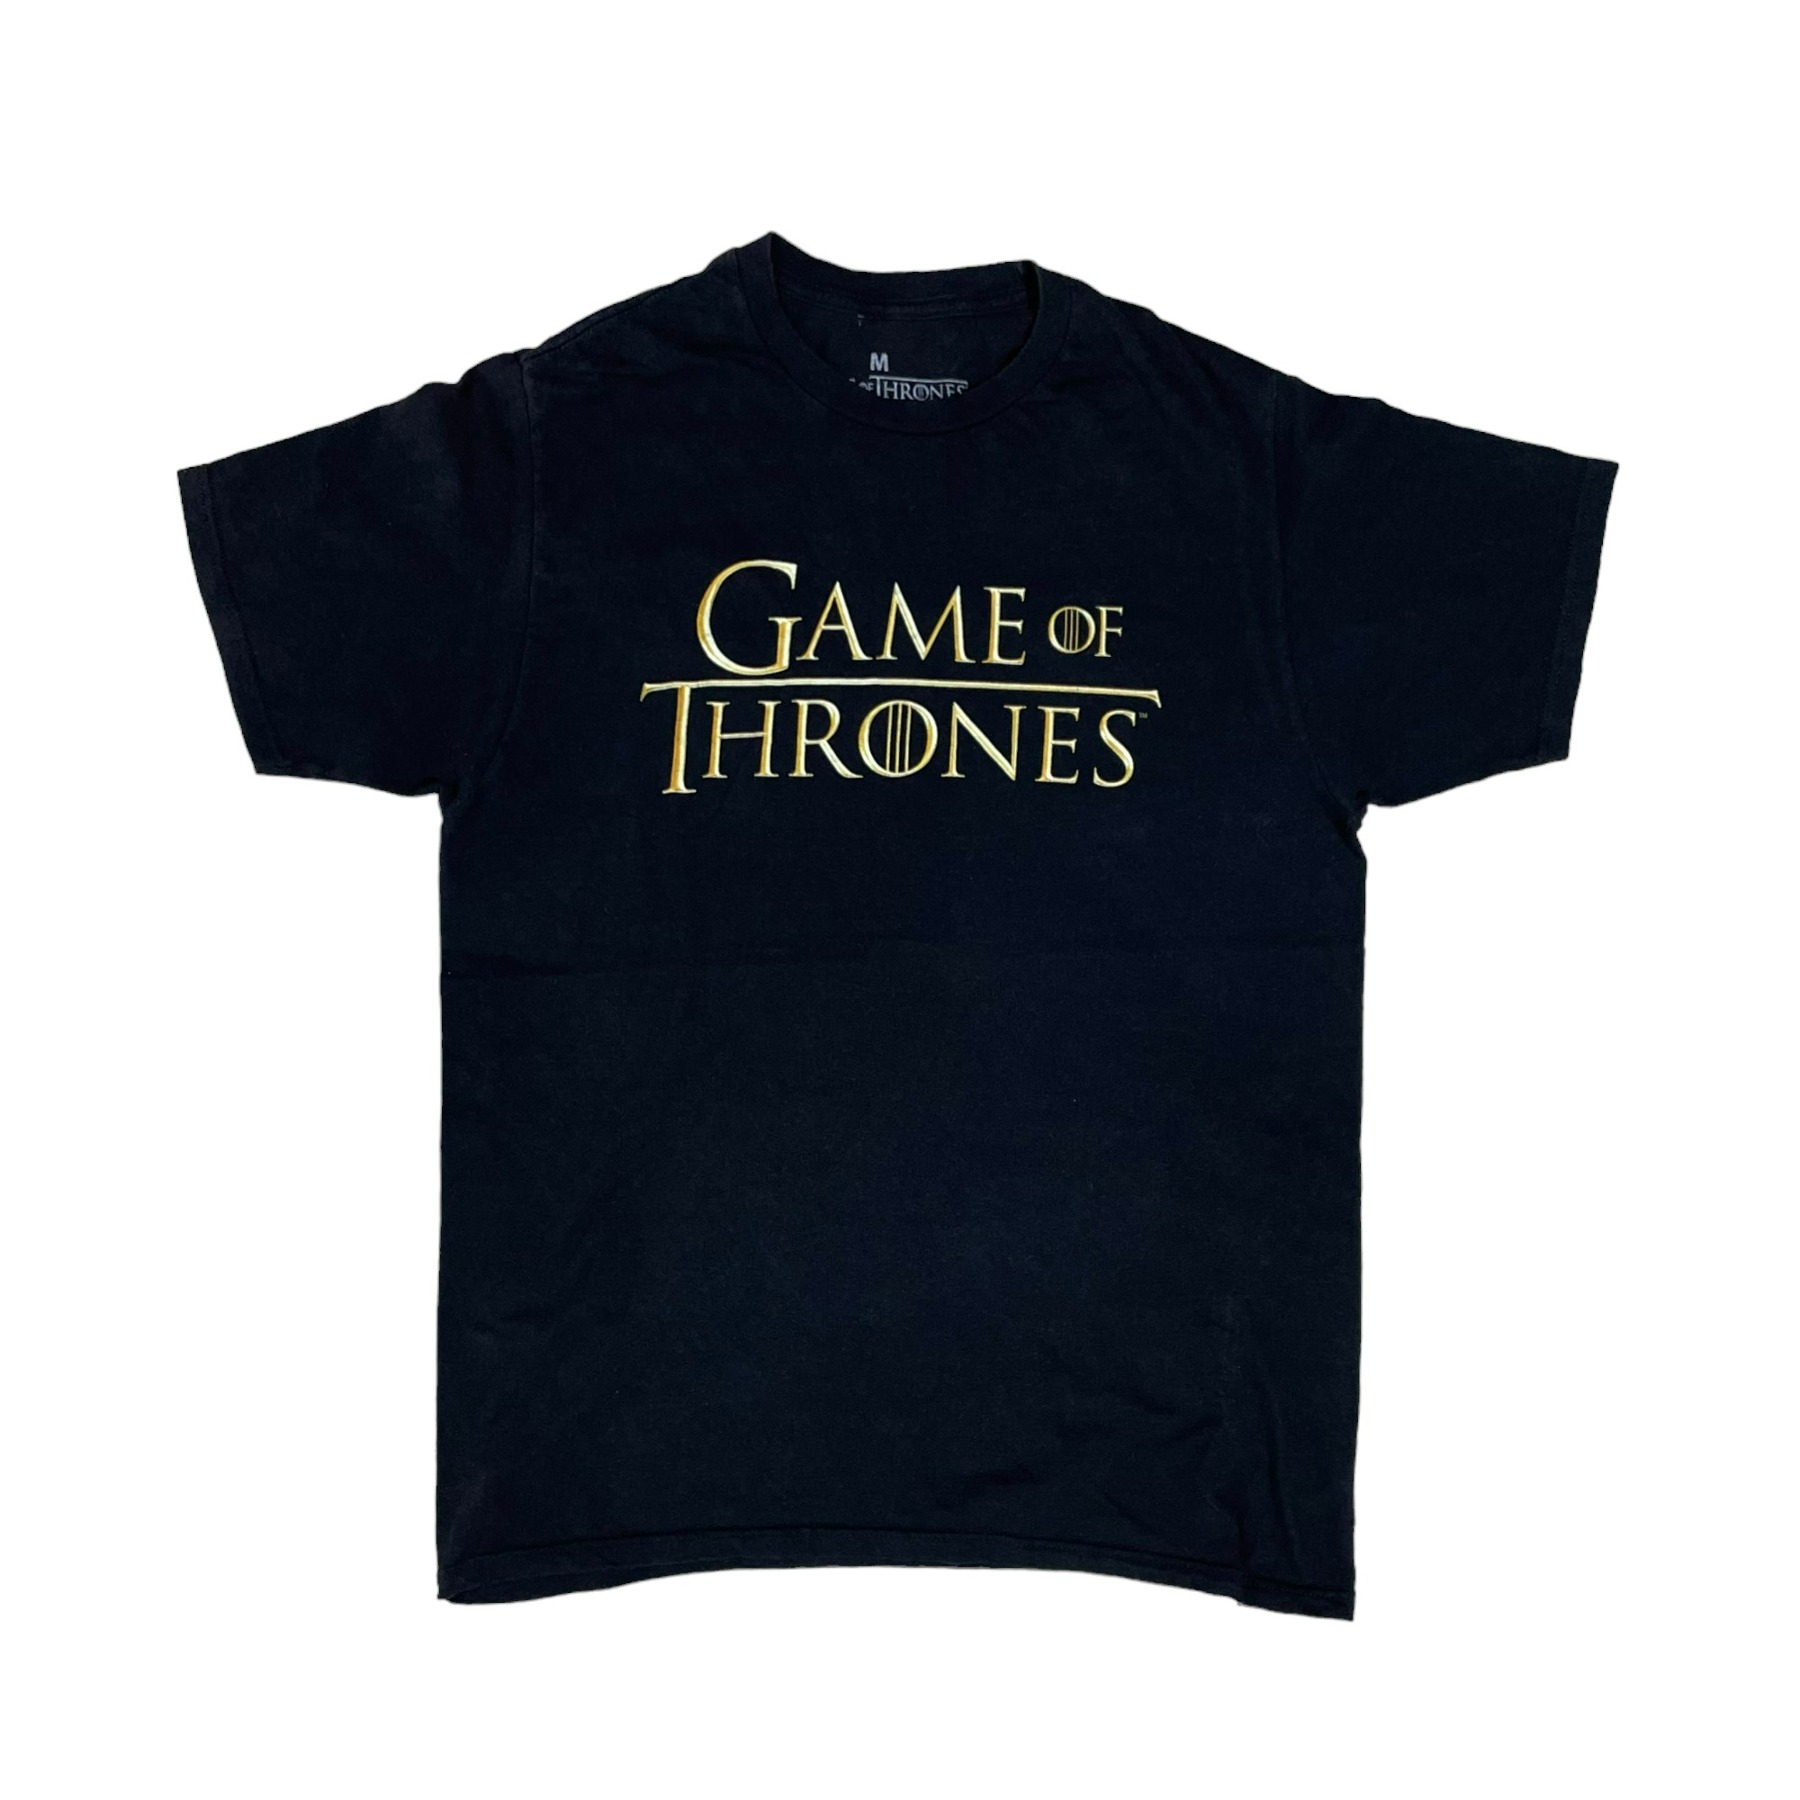 2019 Game of Thrones Tee - M